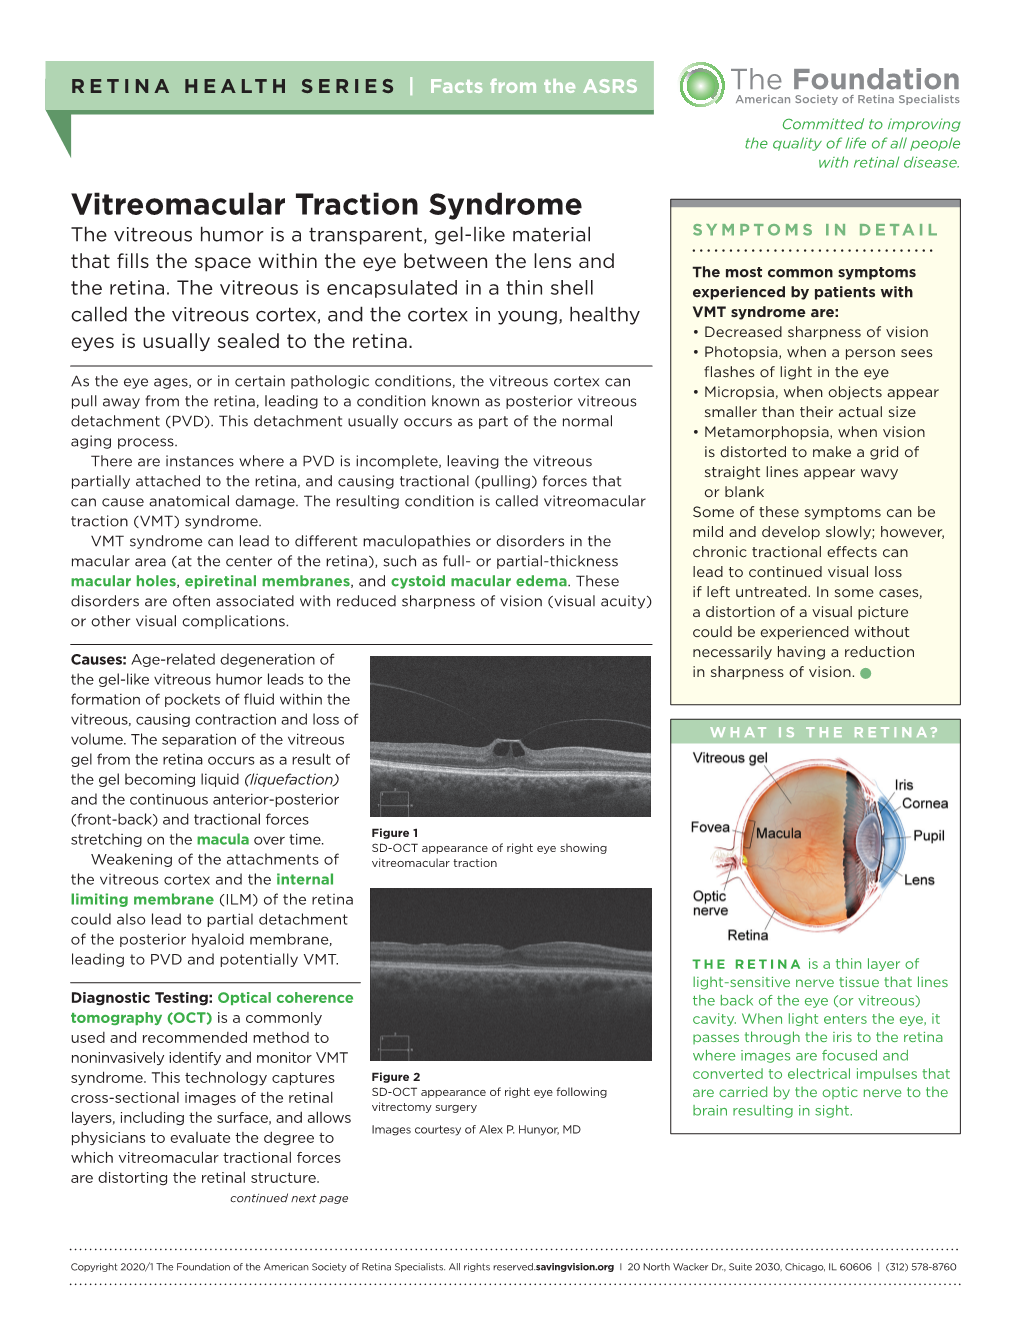 Vitreomacular Traction Syndrome